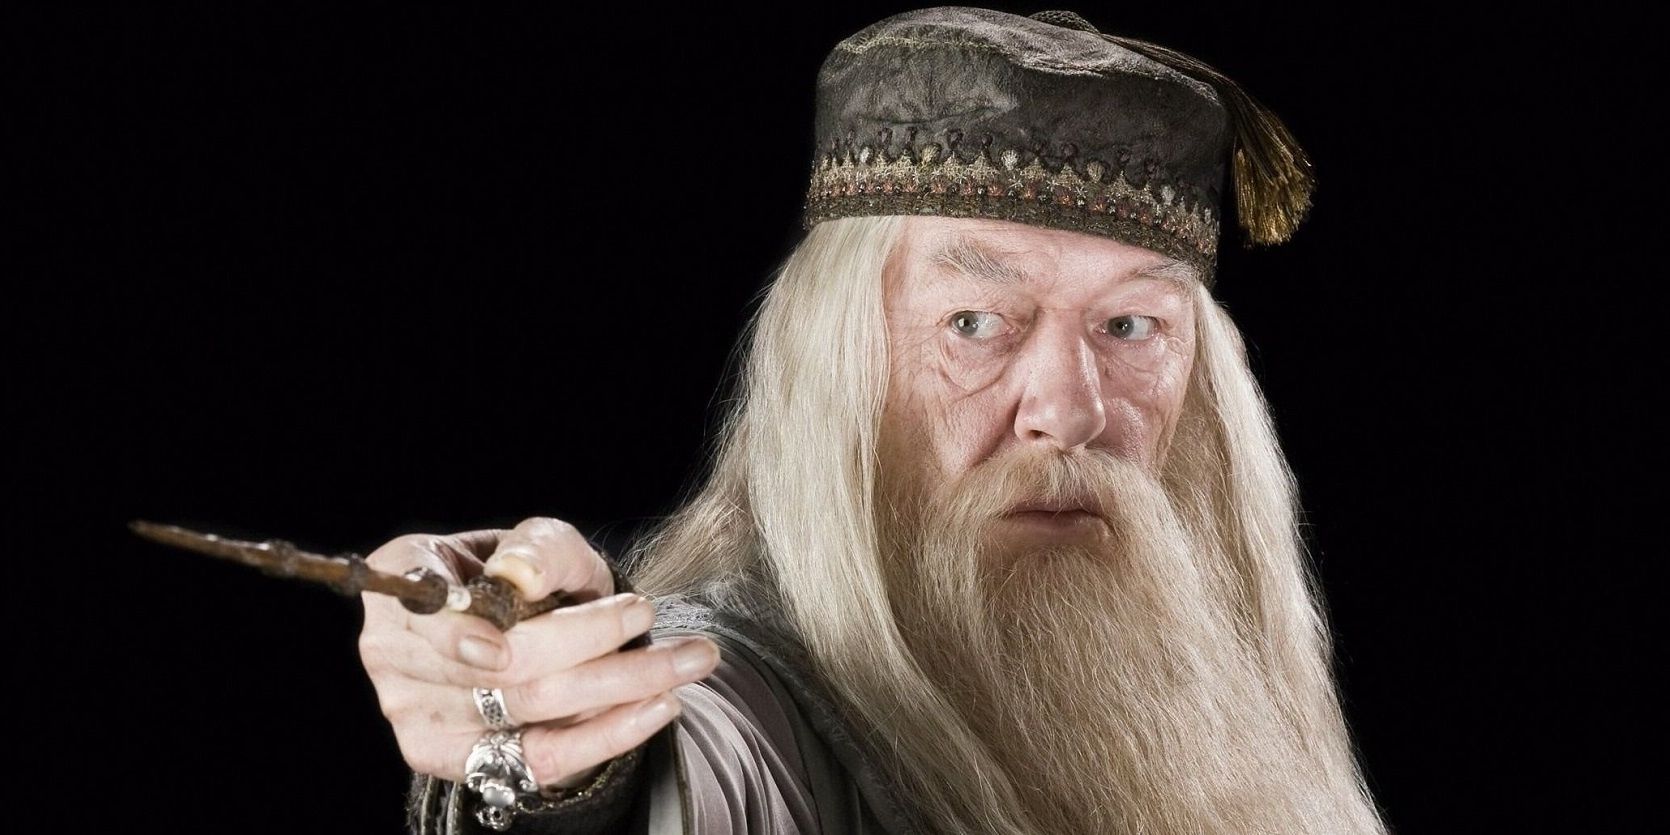 Harry Potter 10 Unpopular Opinions About Dumbledore (According To Reddit)